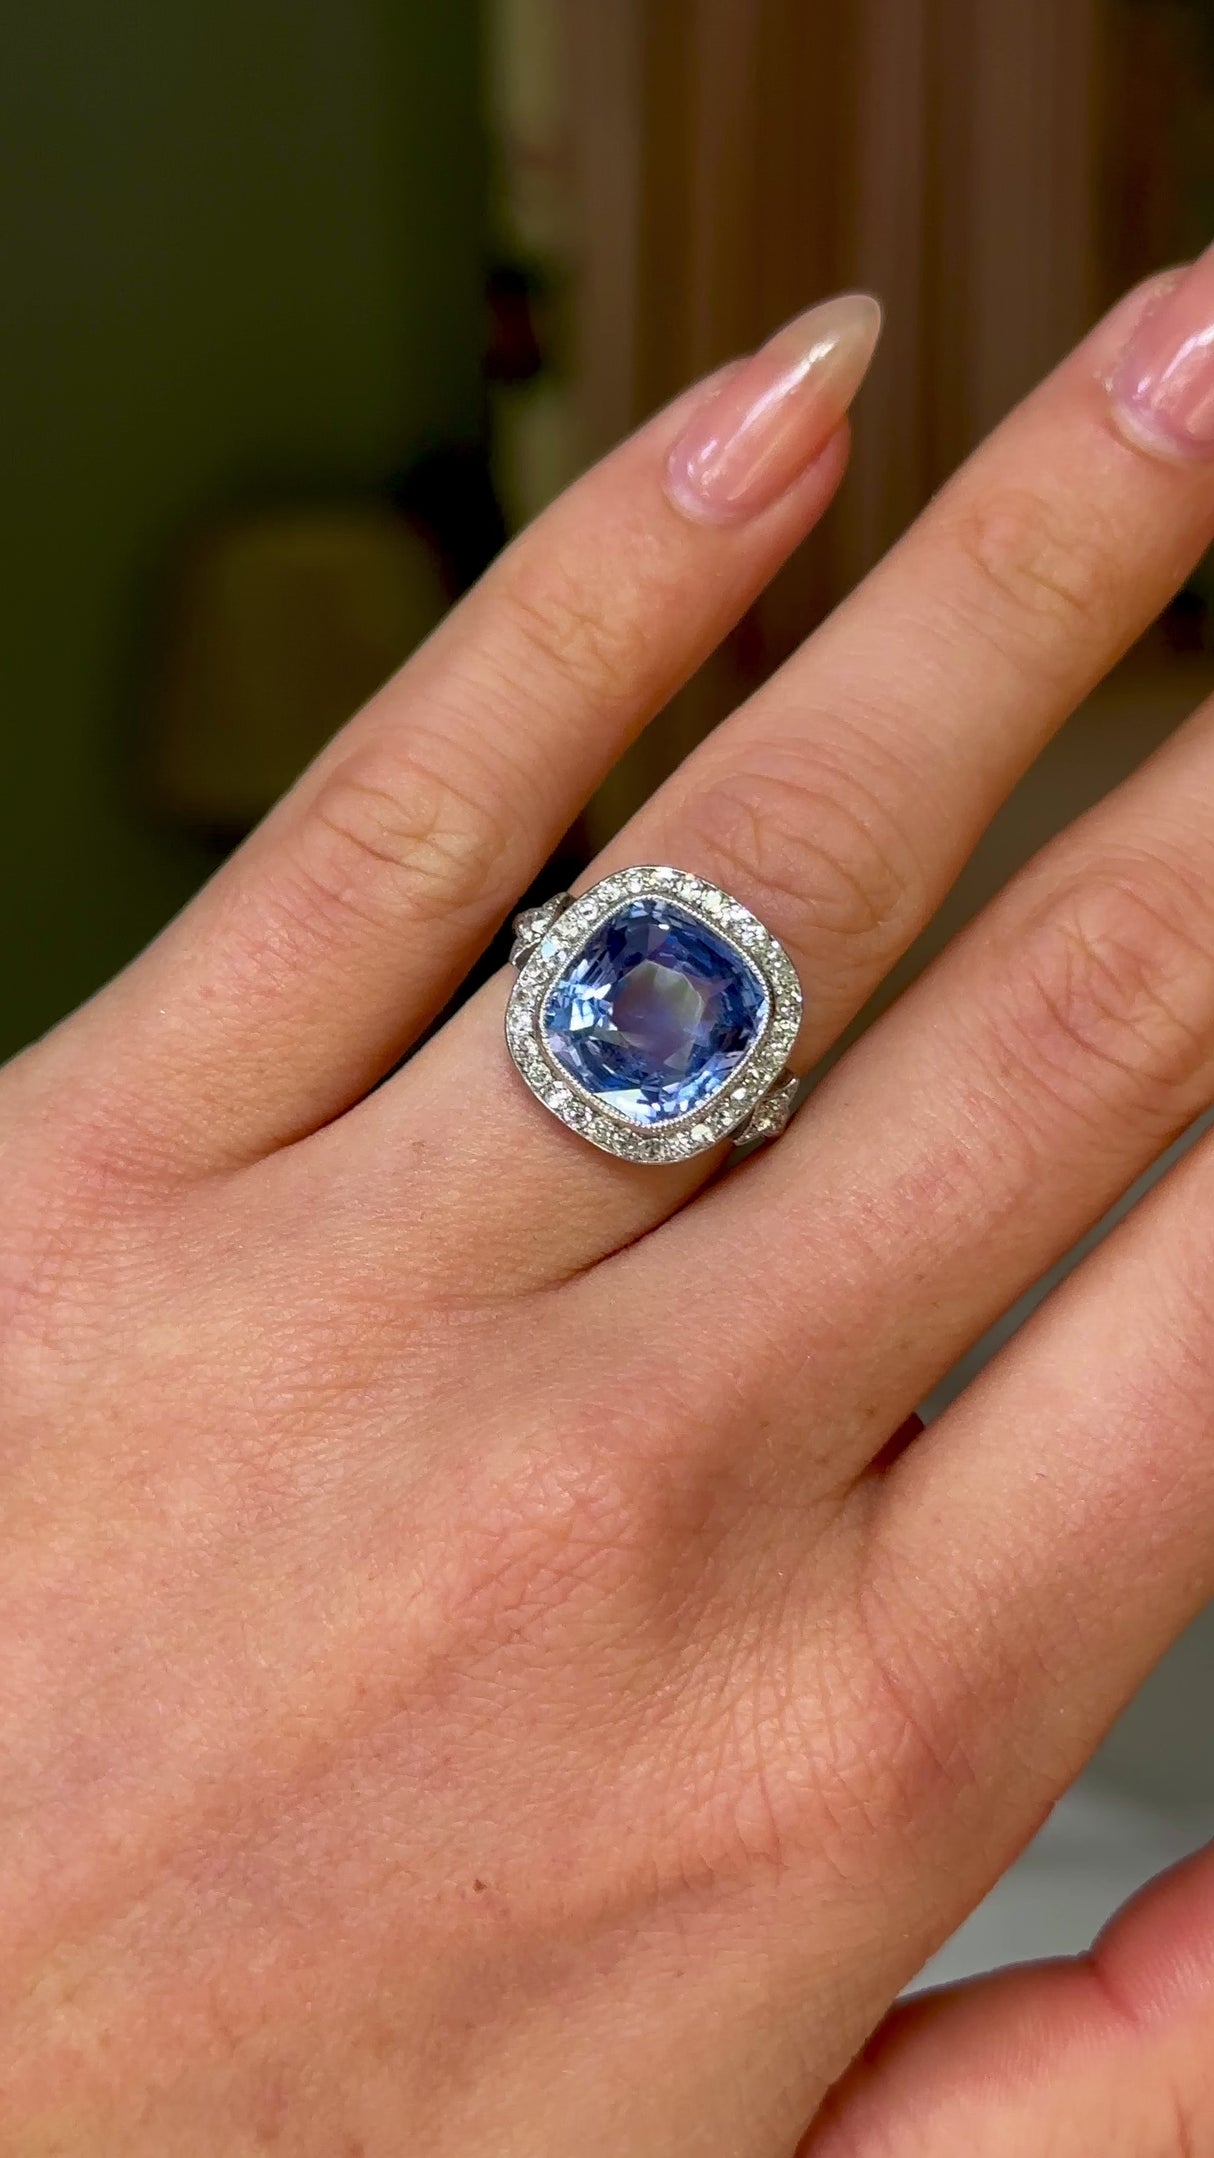 Antique, Belle Époque Sapphire and Diamond Cluster Ring, 18ct White Gold worn on hand and moved around to give perspective.